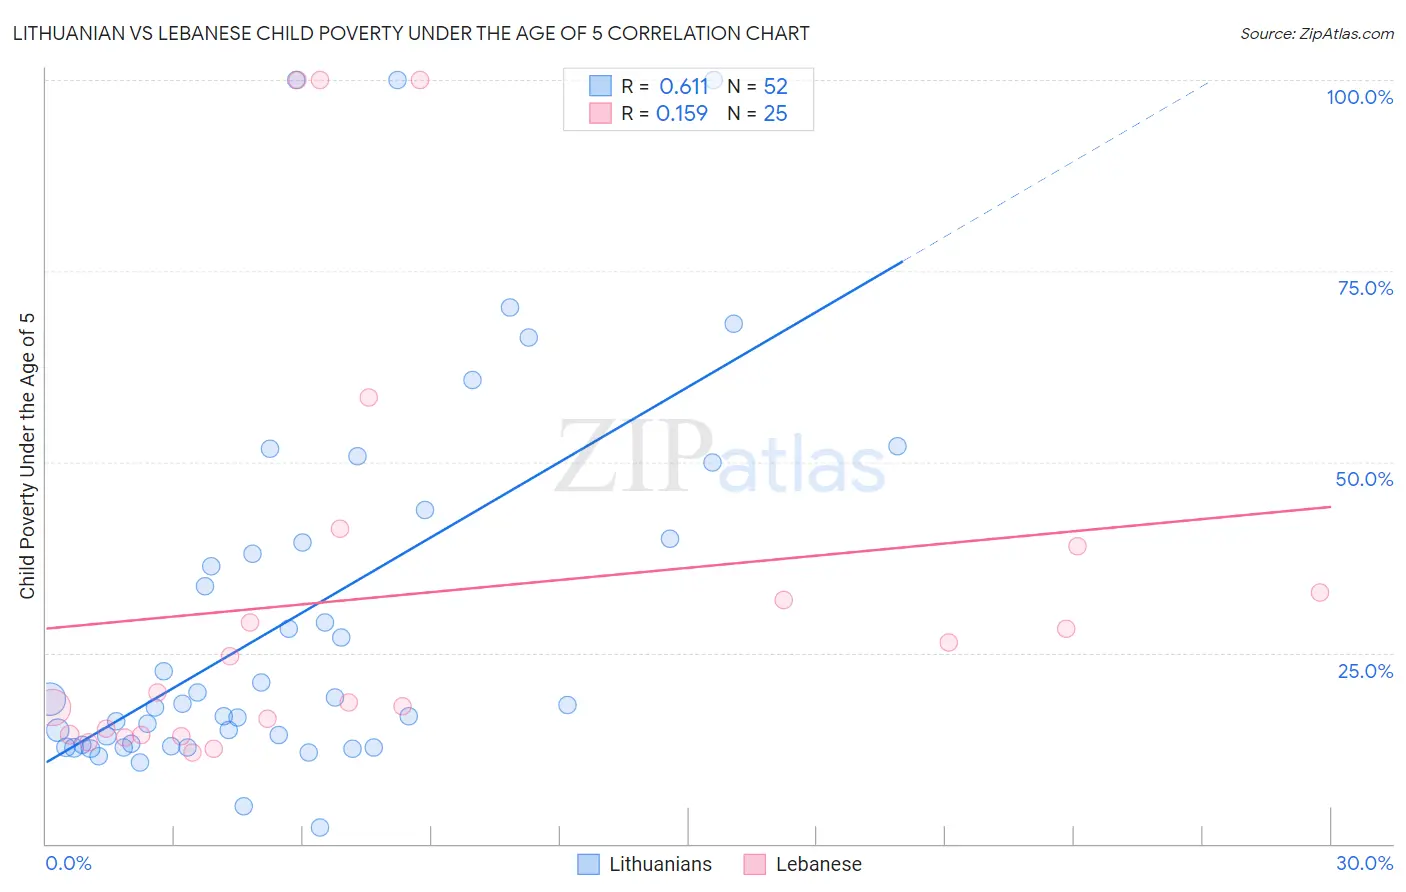 Lithuanian vs Lebanese Child Poverty Under the Age of 5